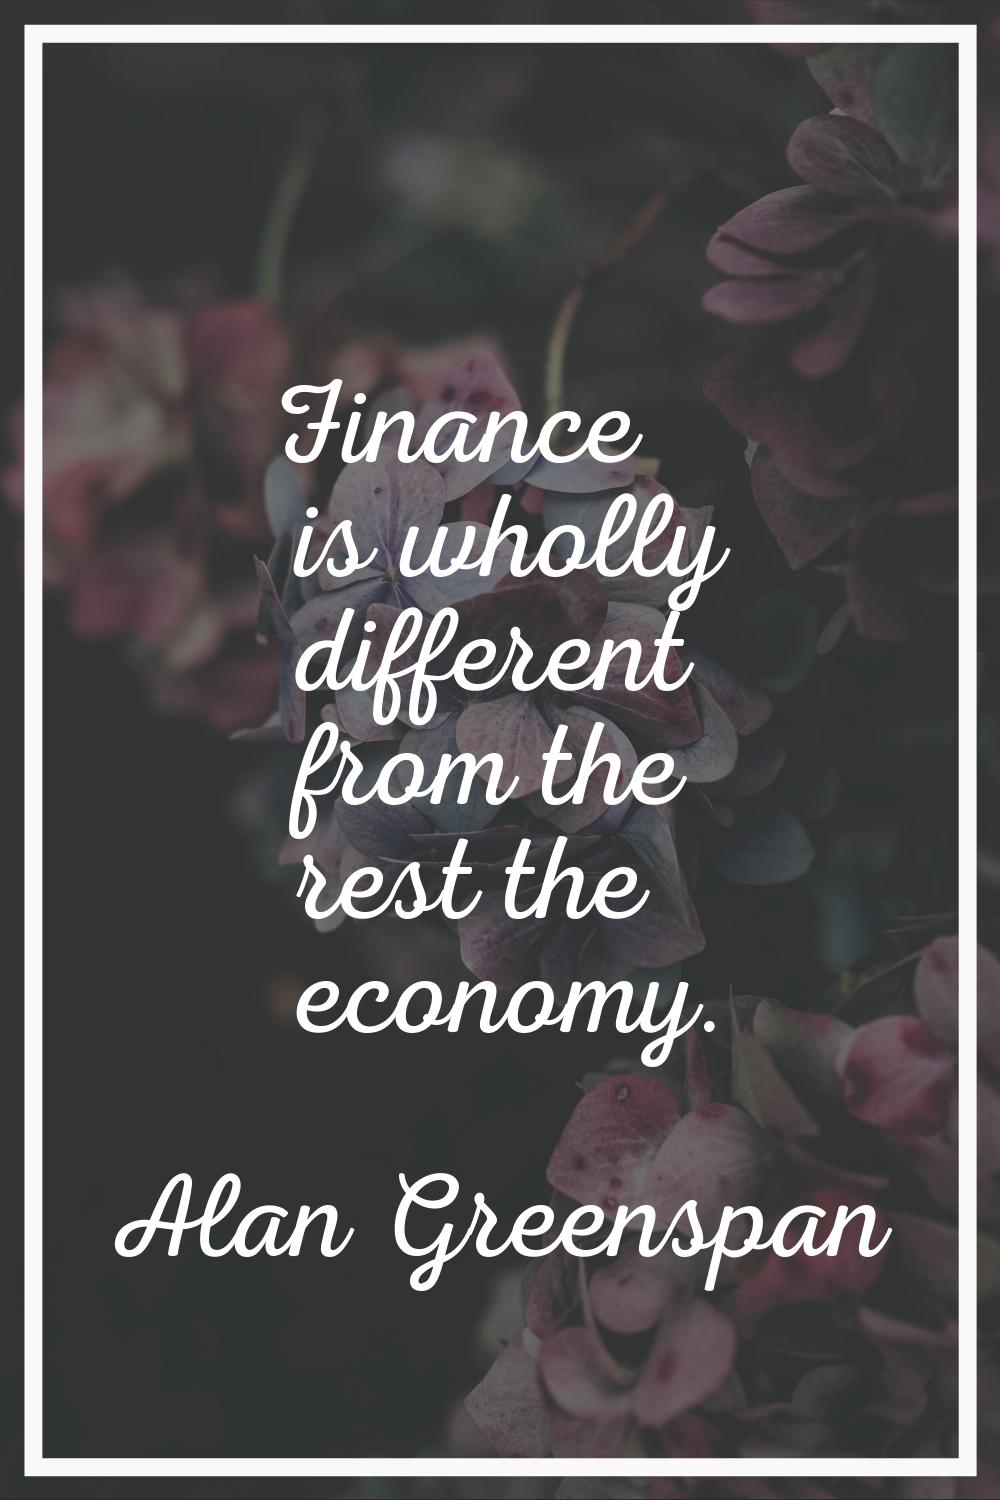 Finance is wholly different from the rest the economy.